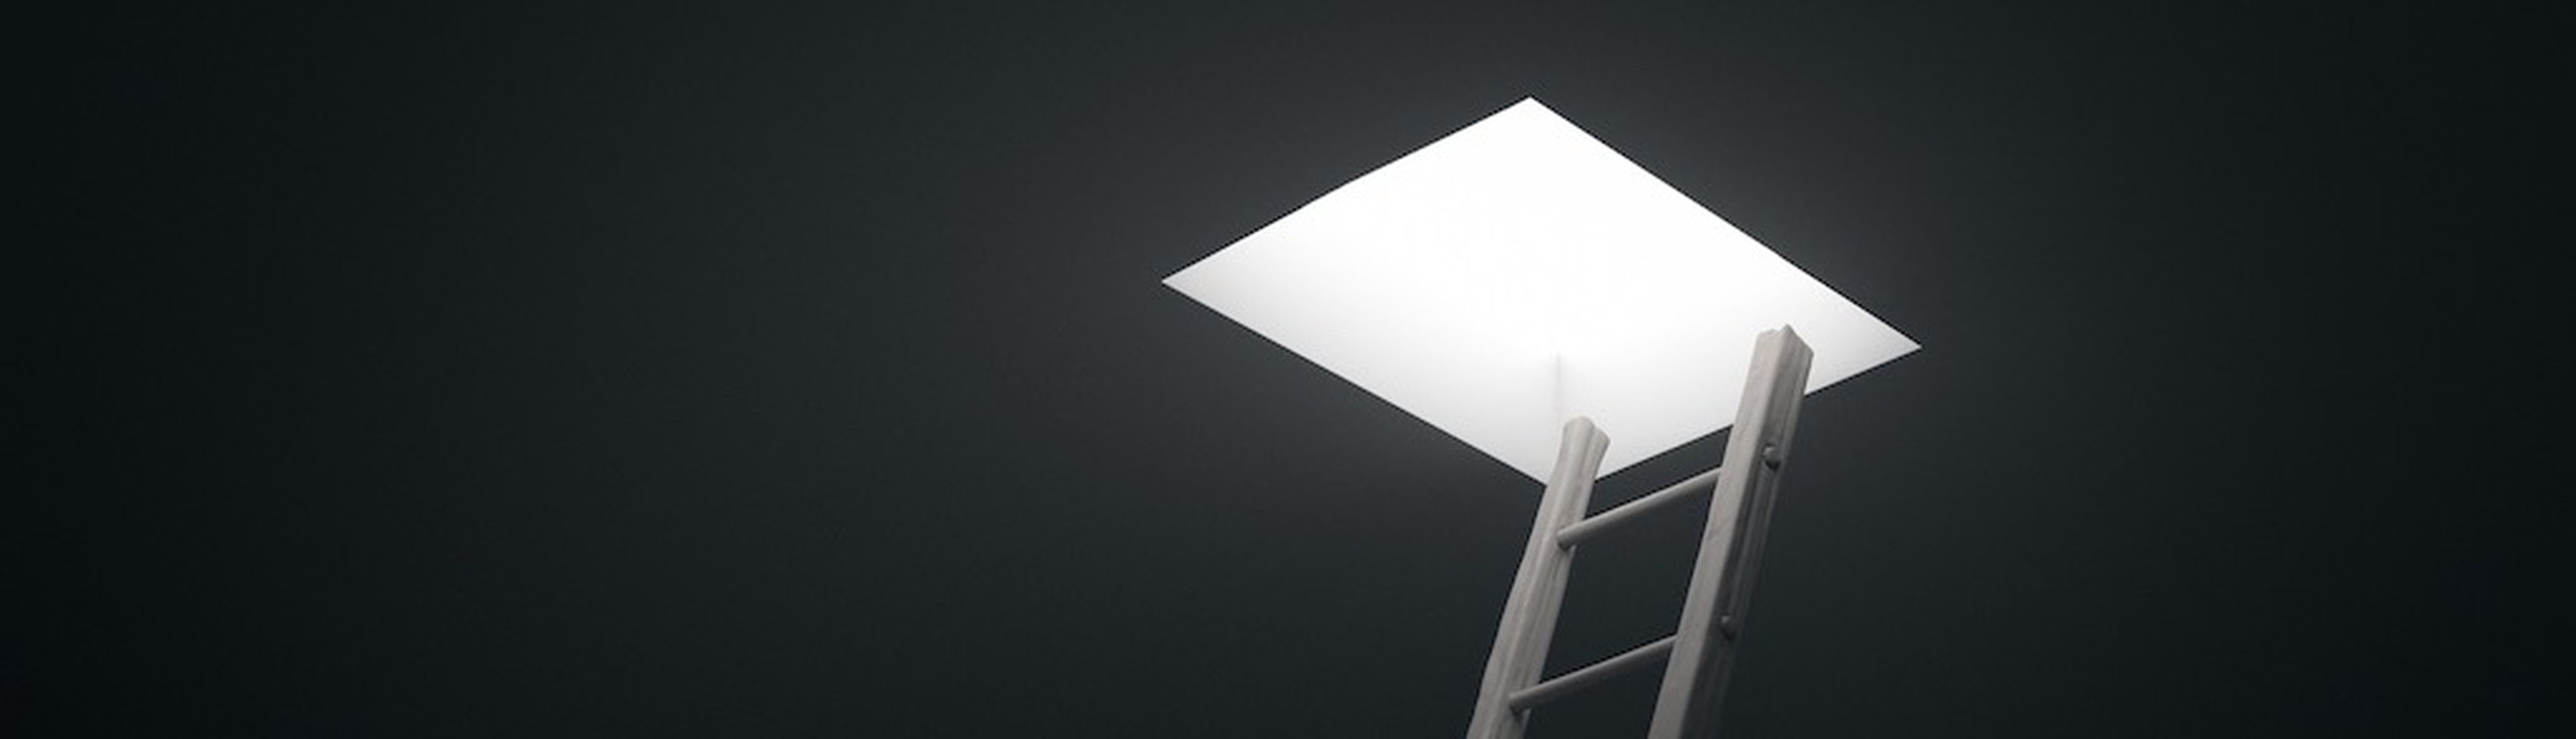 Old Ladder leading to the light. 3d Render. Freedom concept.